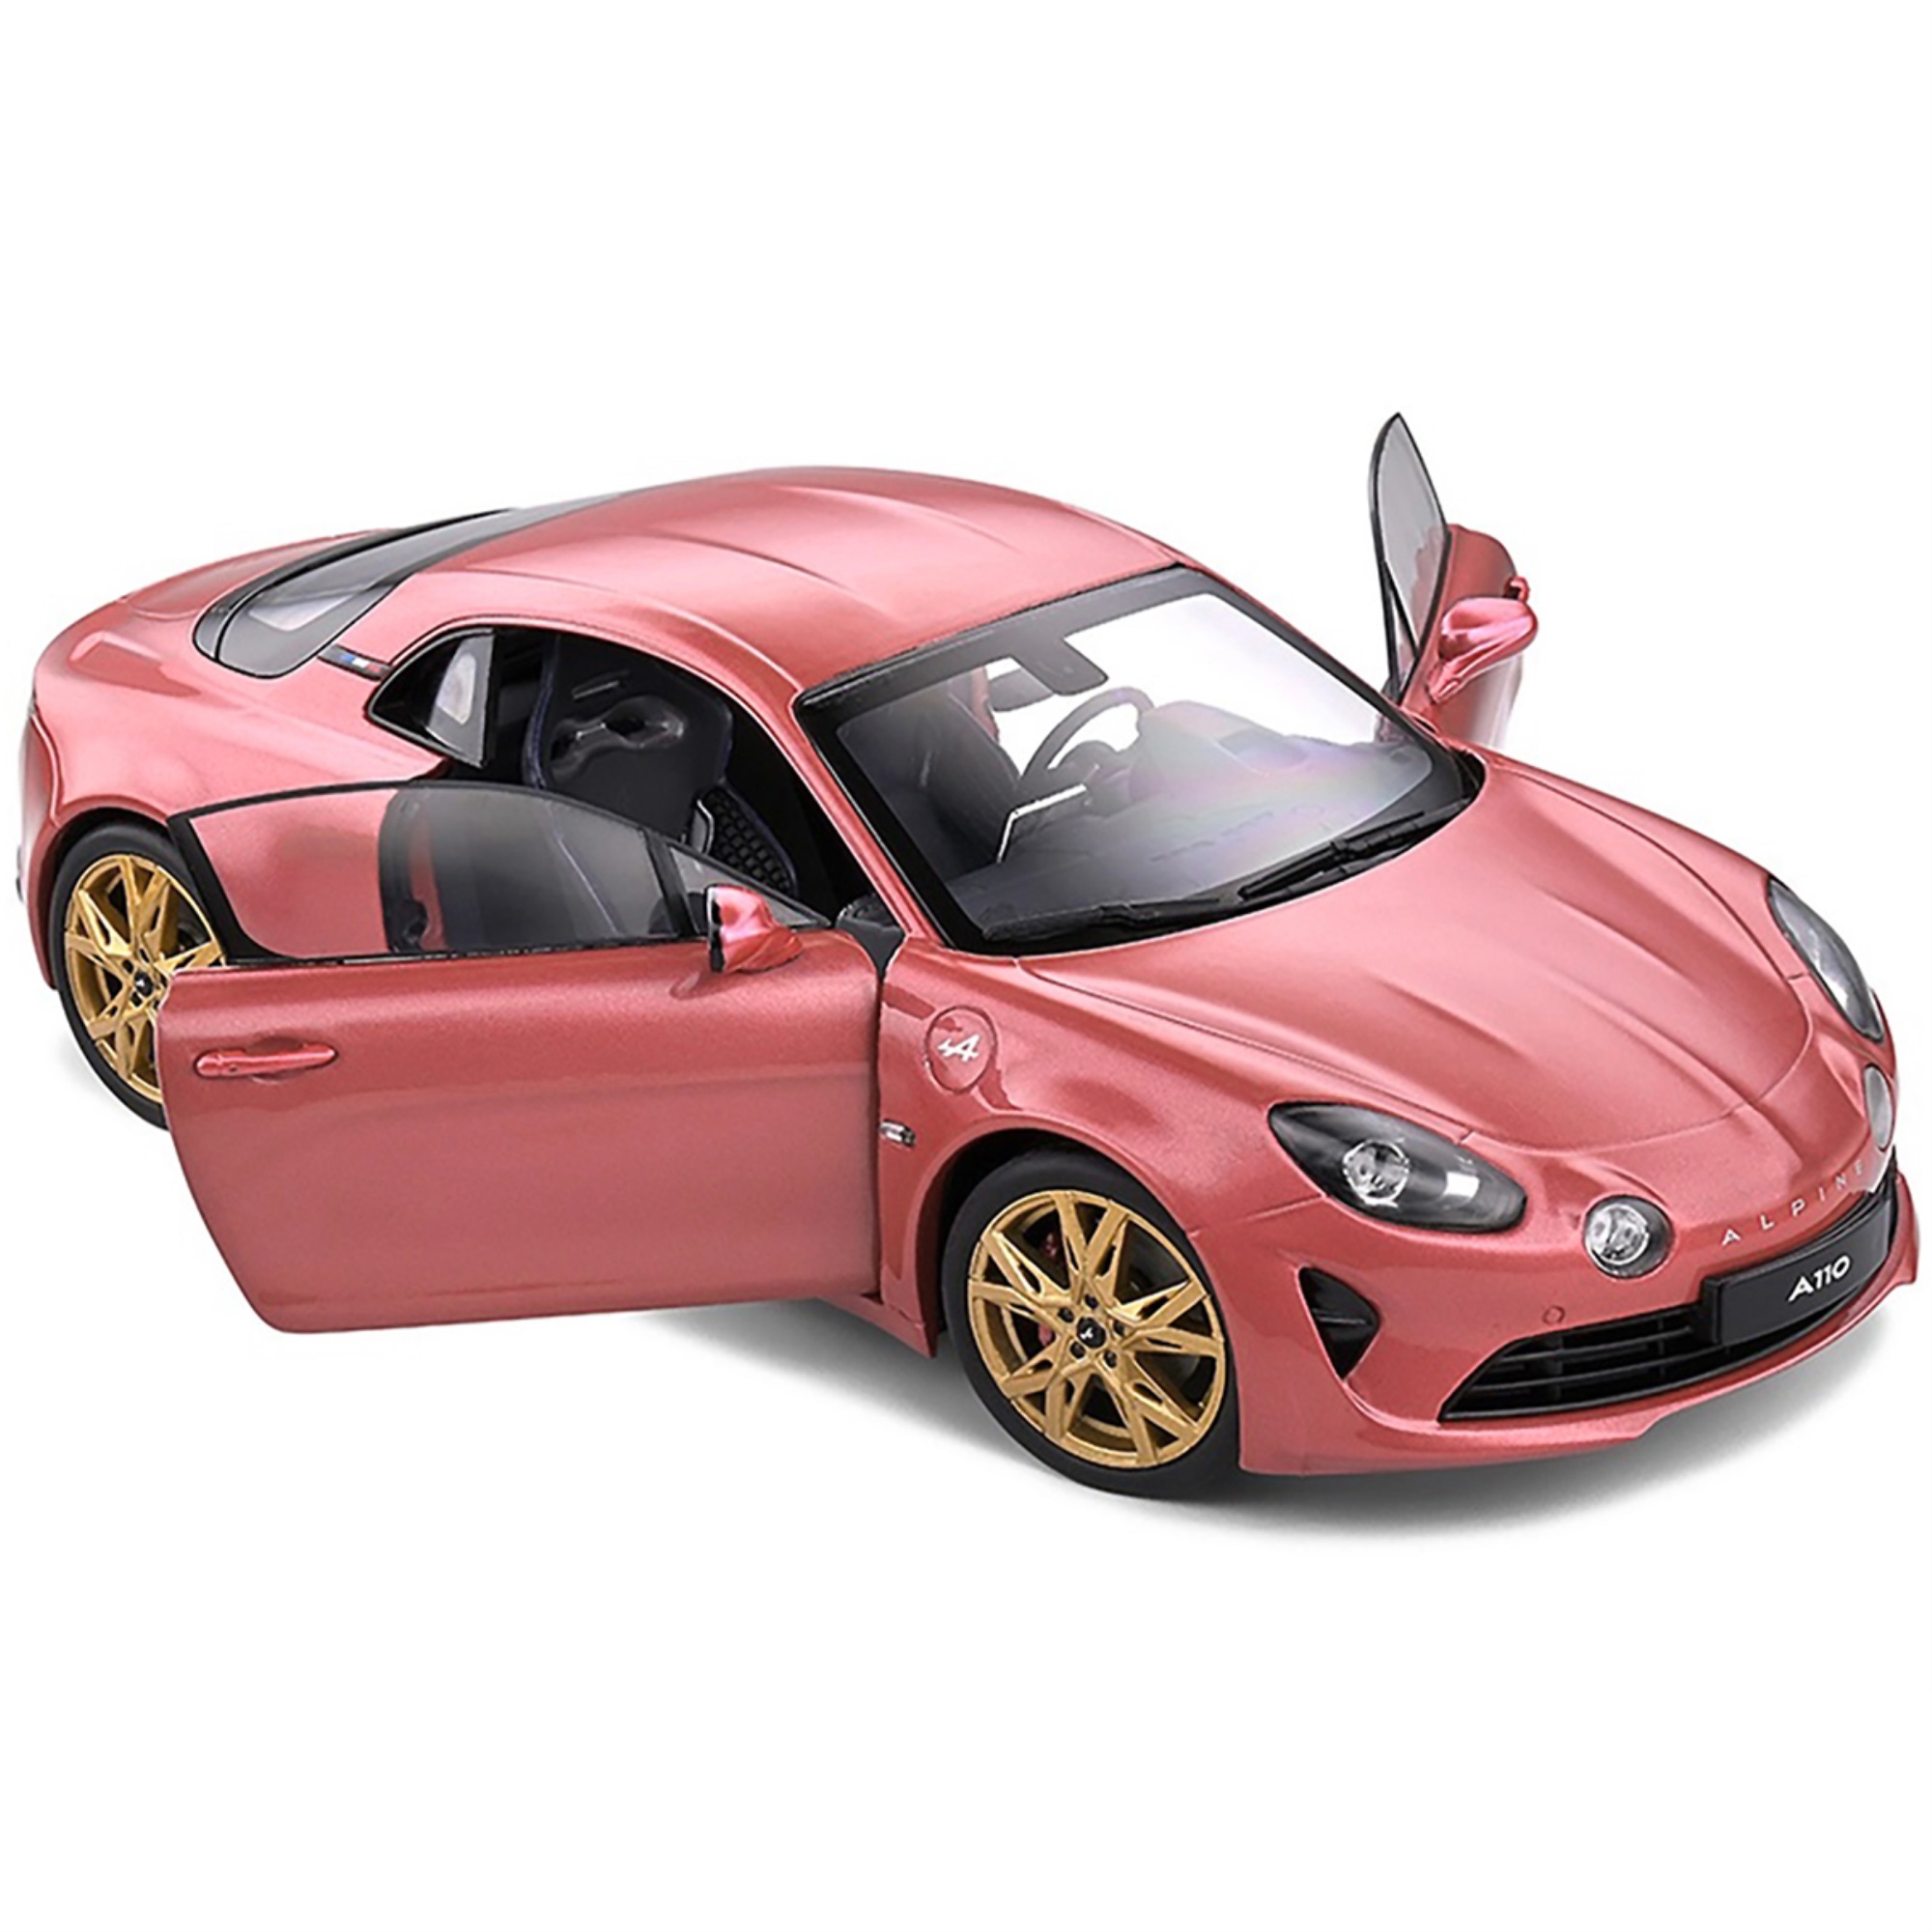 2021 Alpine A110 Rose Bruyere Pink Metallic with Gold Wheels 1/18 Diecast  Model Car by Solido